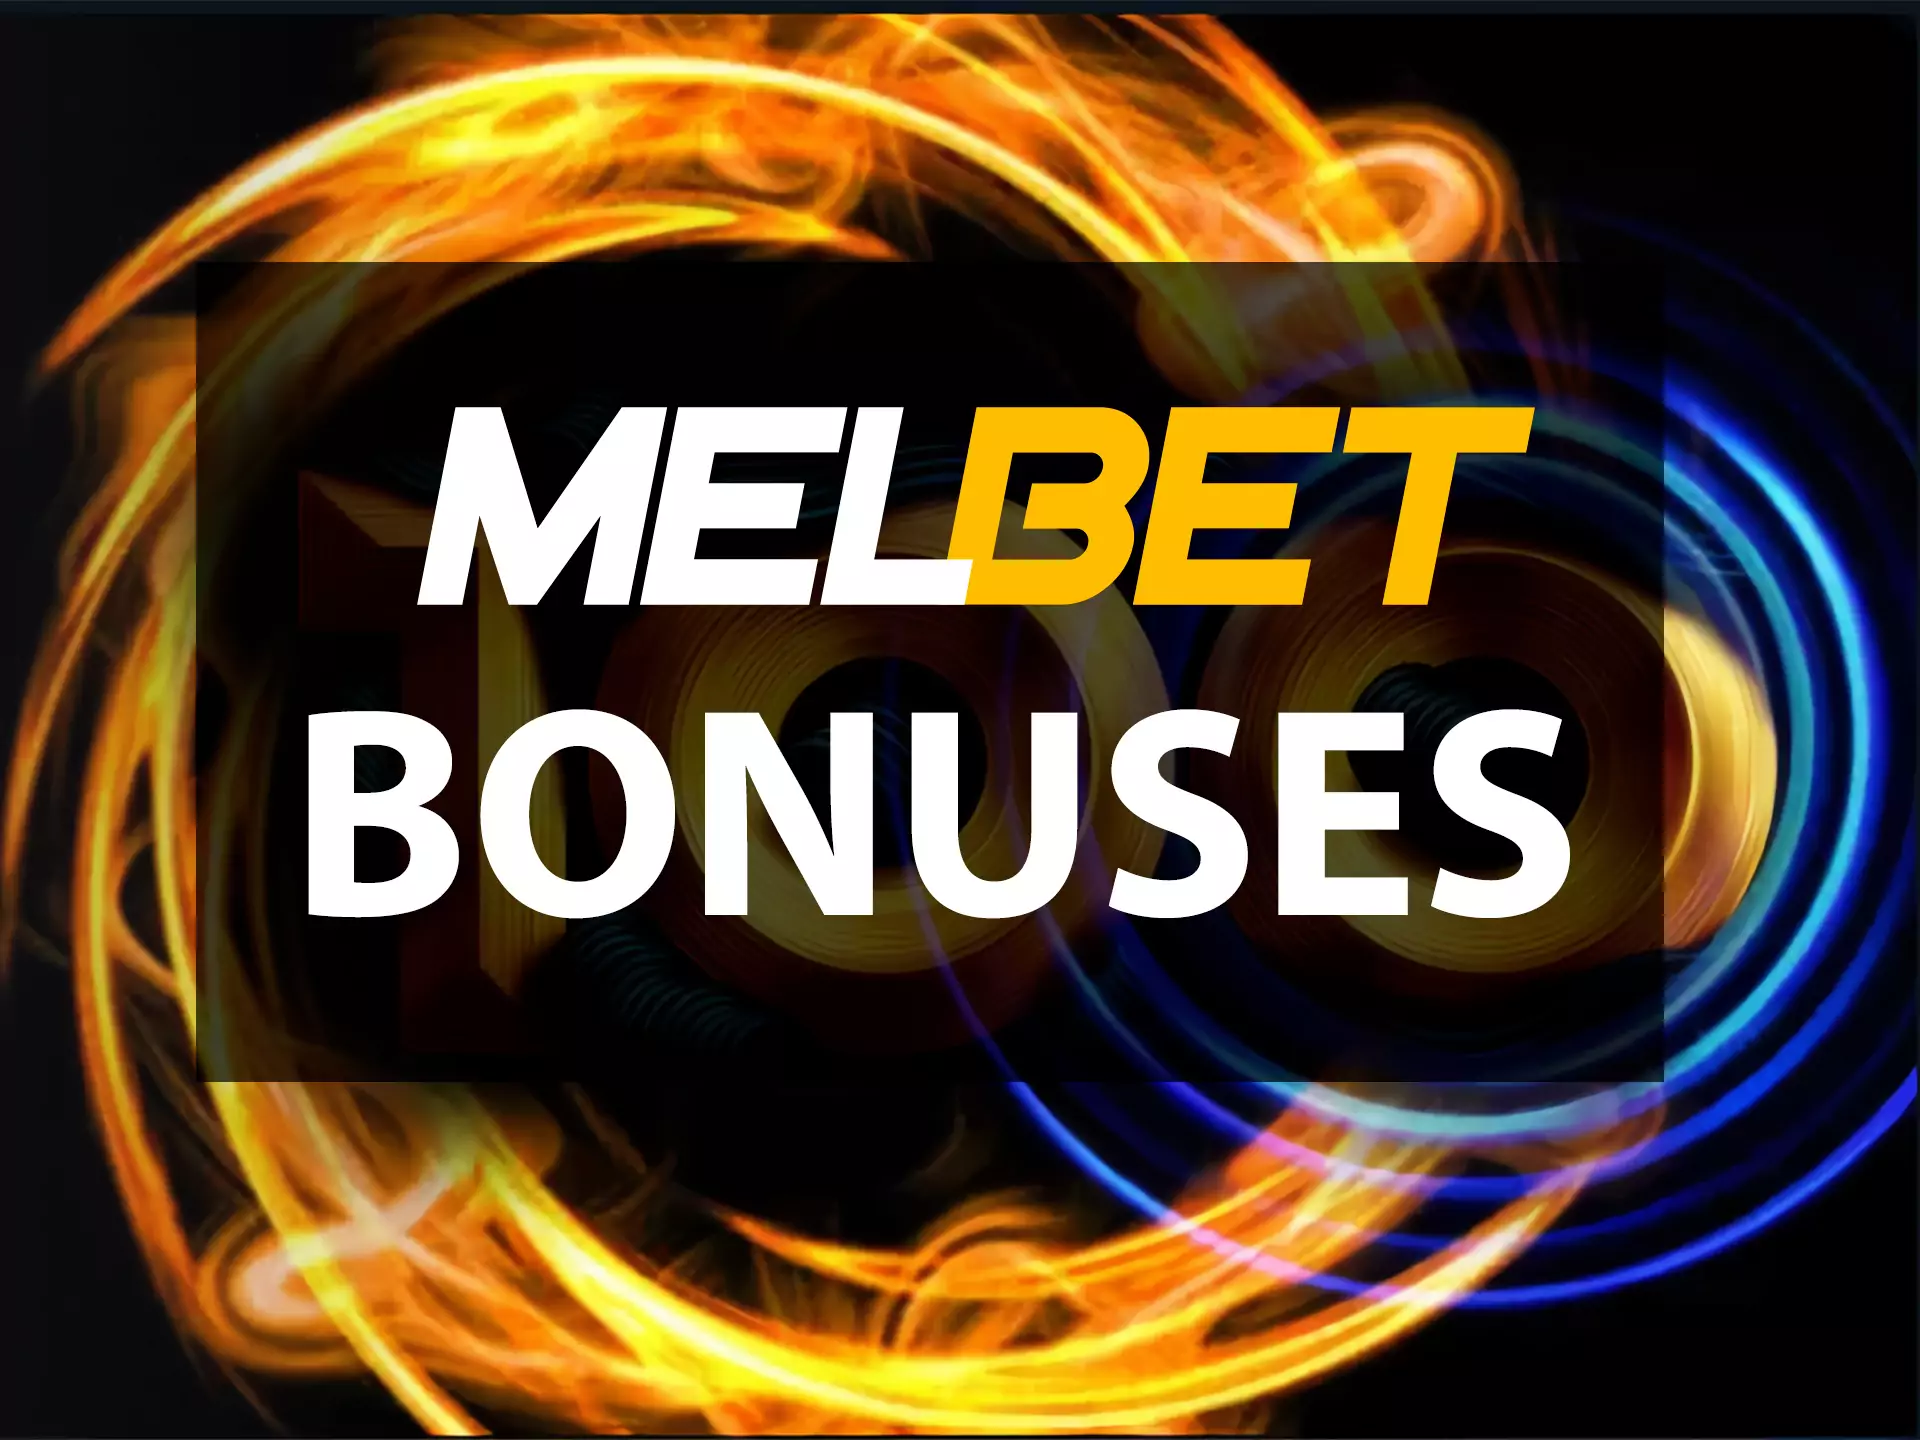 There a re a lot of other profitable bonuses at Melbet.